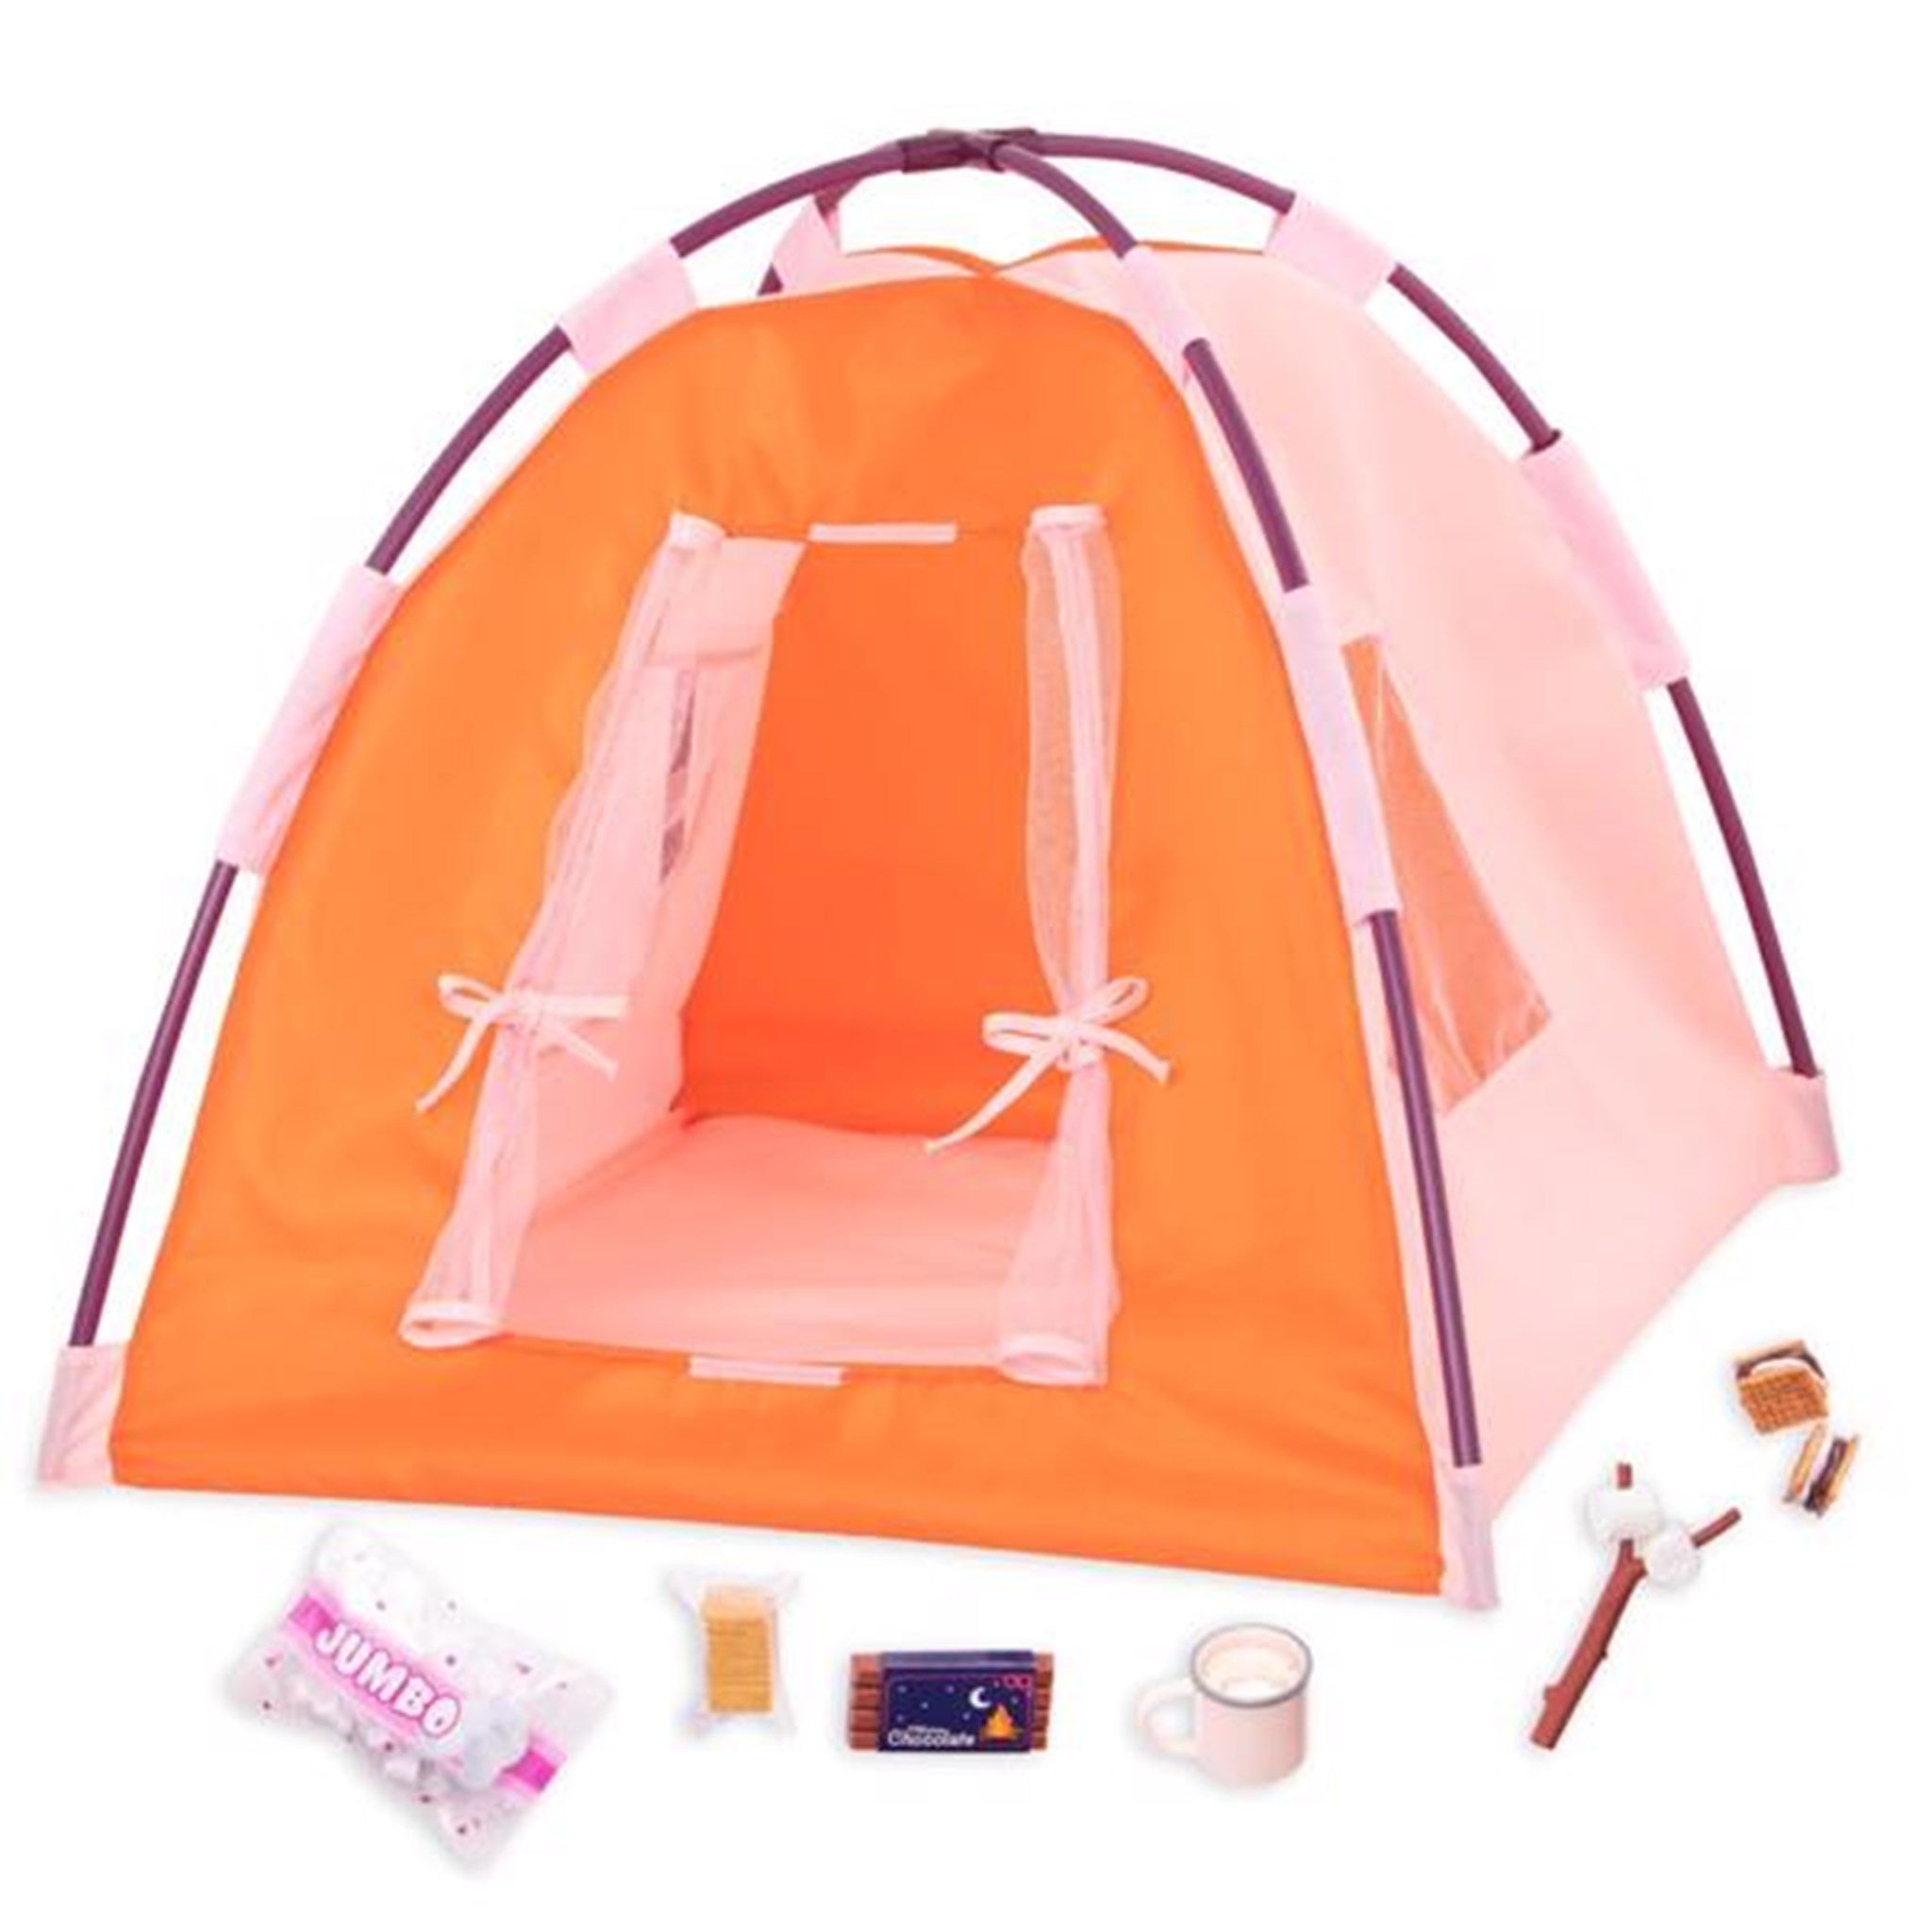 Our Generation Camping Tent